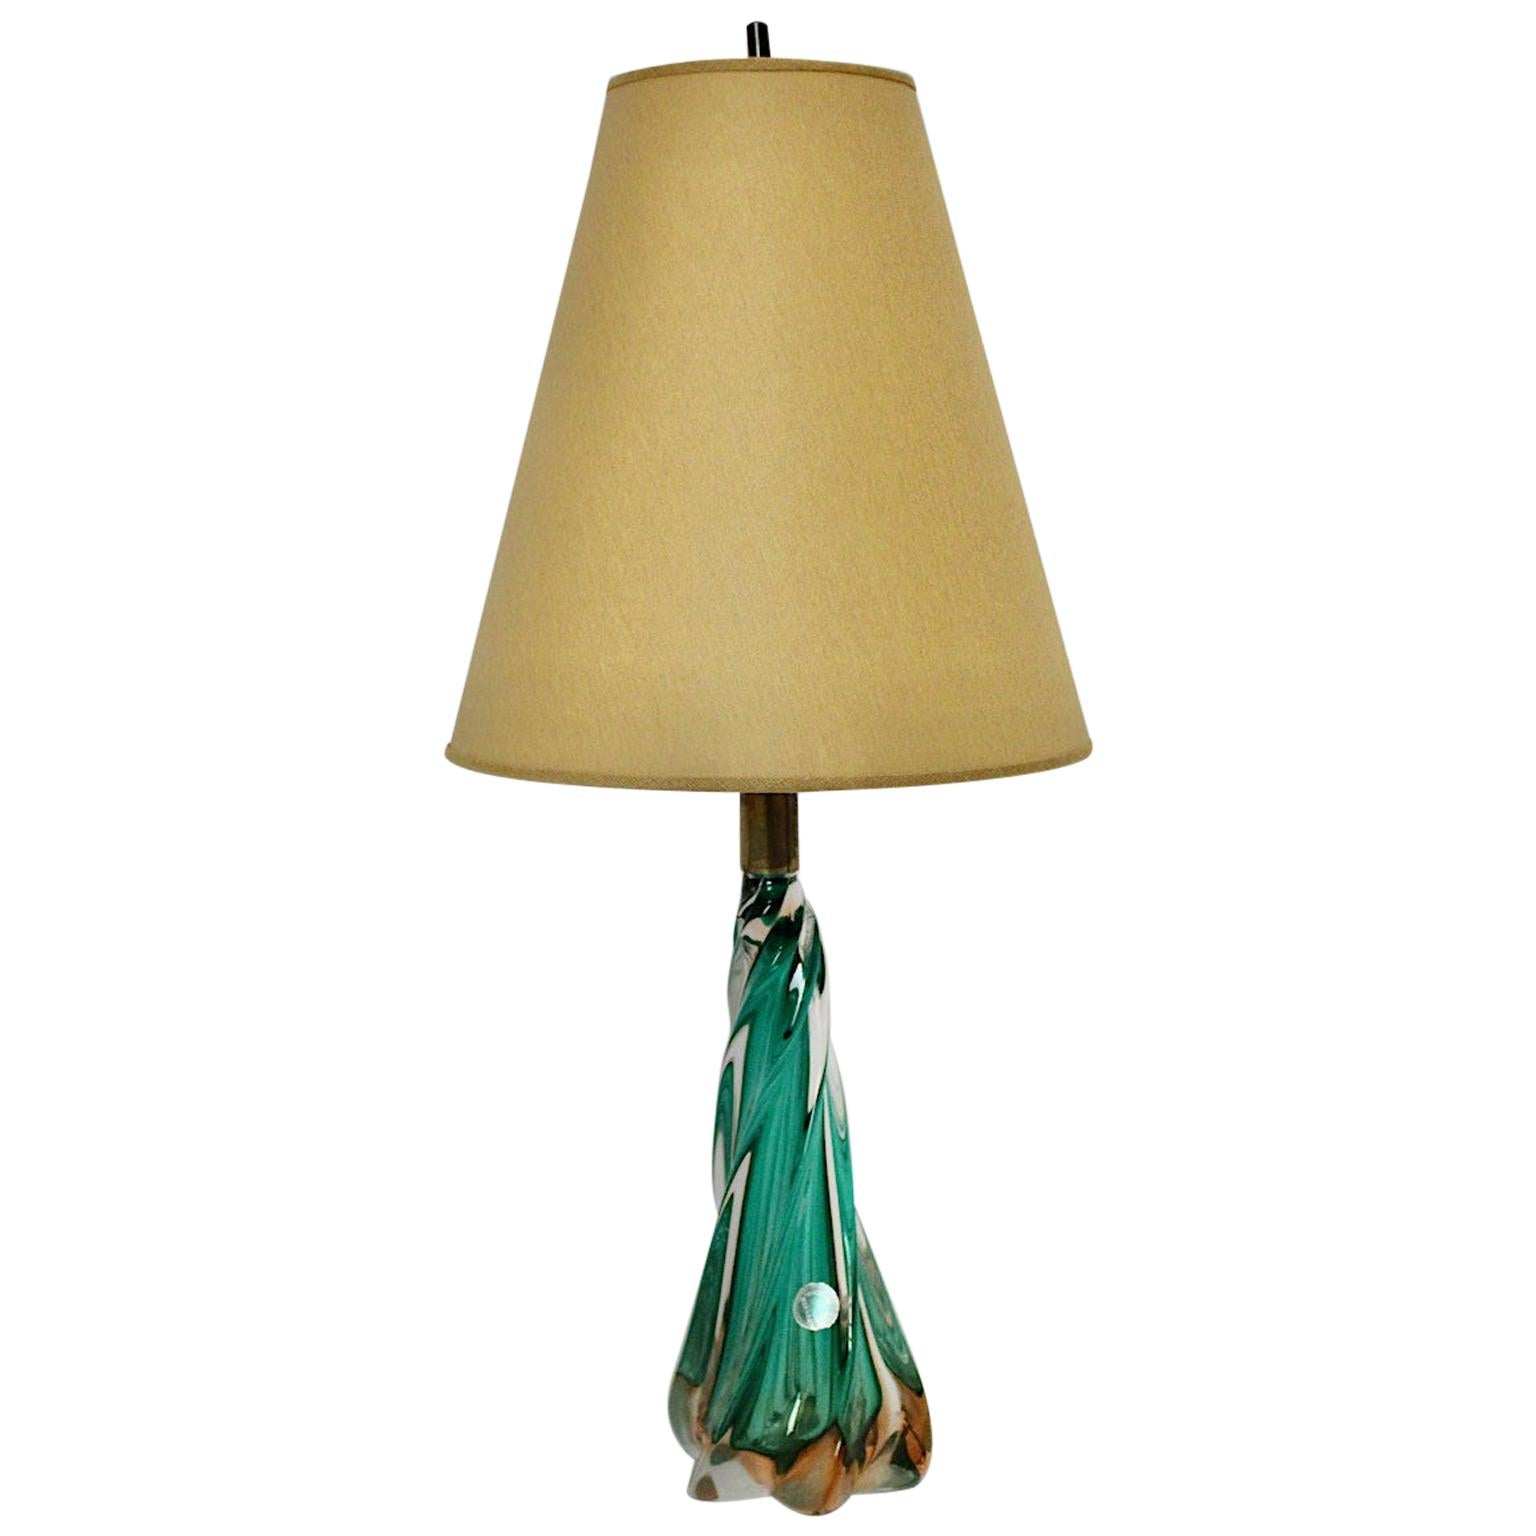 Mid-Century Modern Vintage Glass Green Gold Table Lamp, 1950s, Italy For Sale